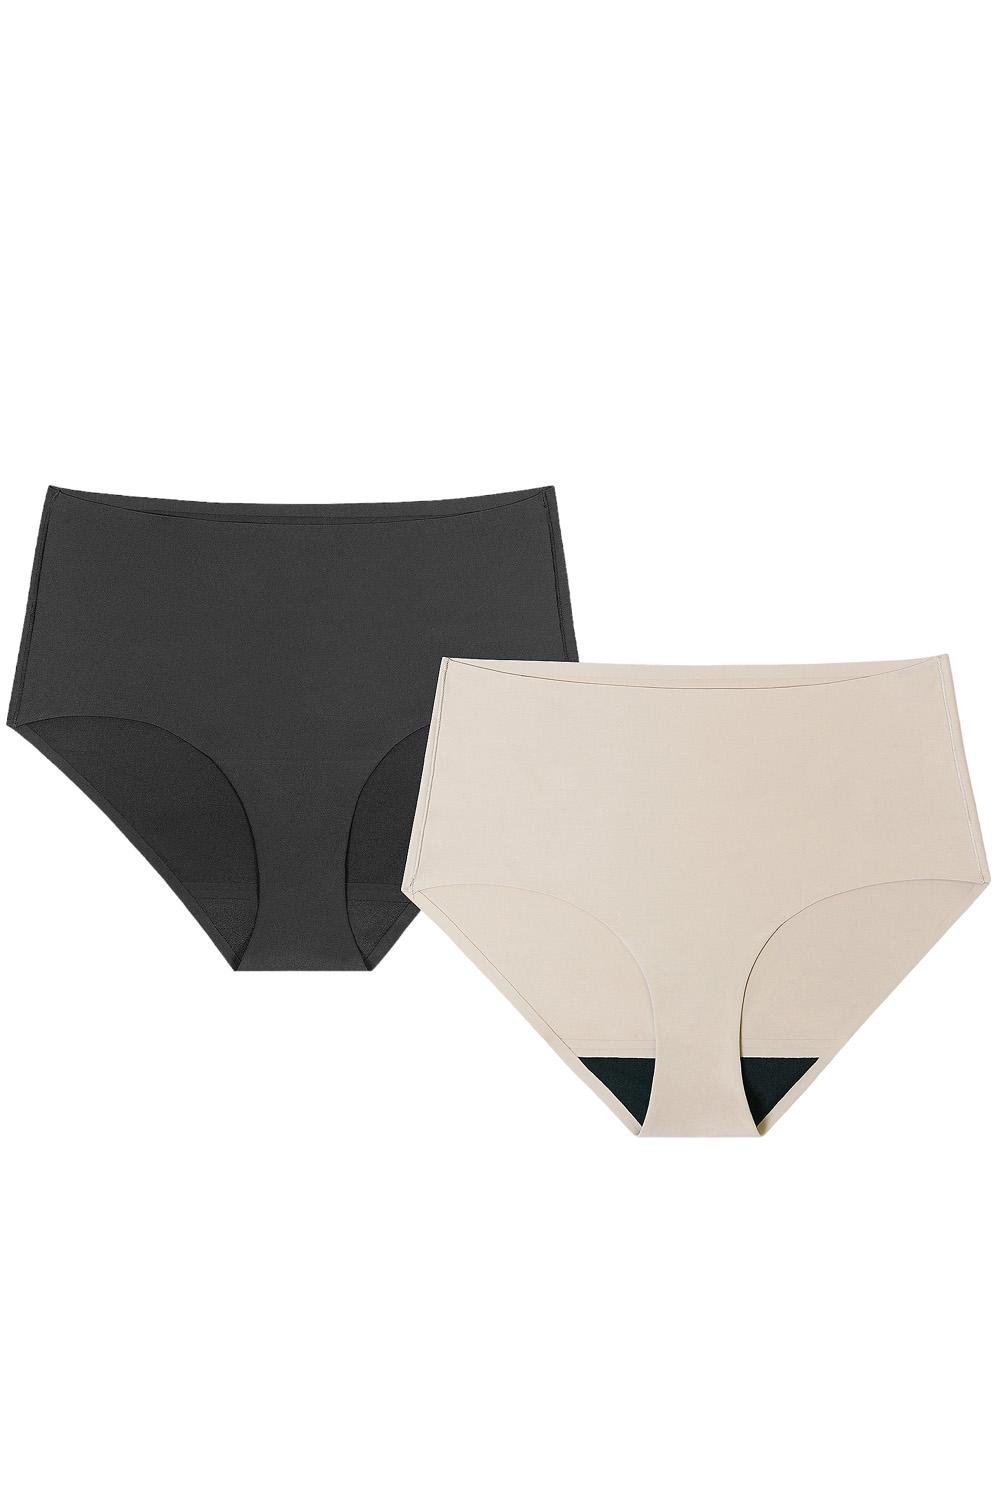 Anti x Proof 2-pack Moderate Leakproof Mid-Rise Brief Black/Sand